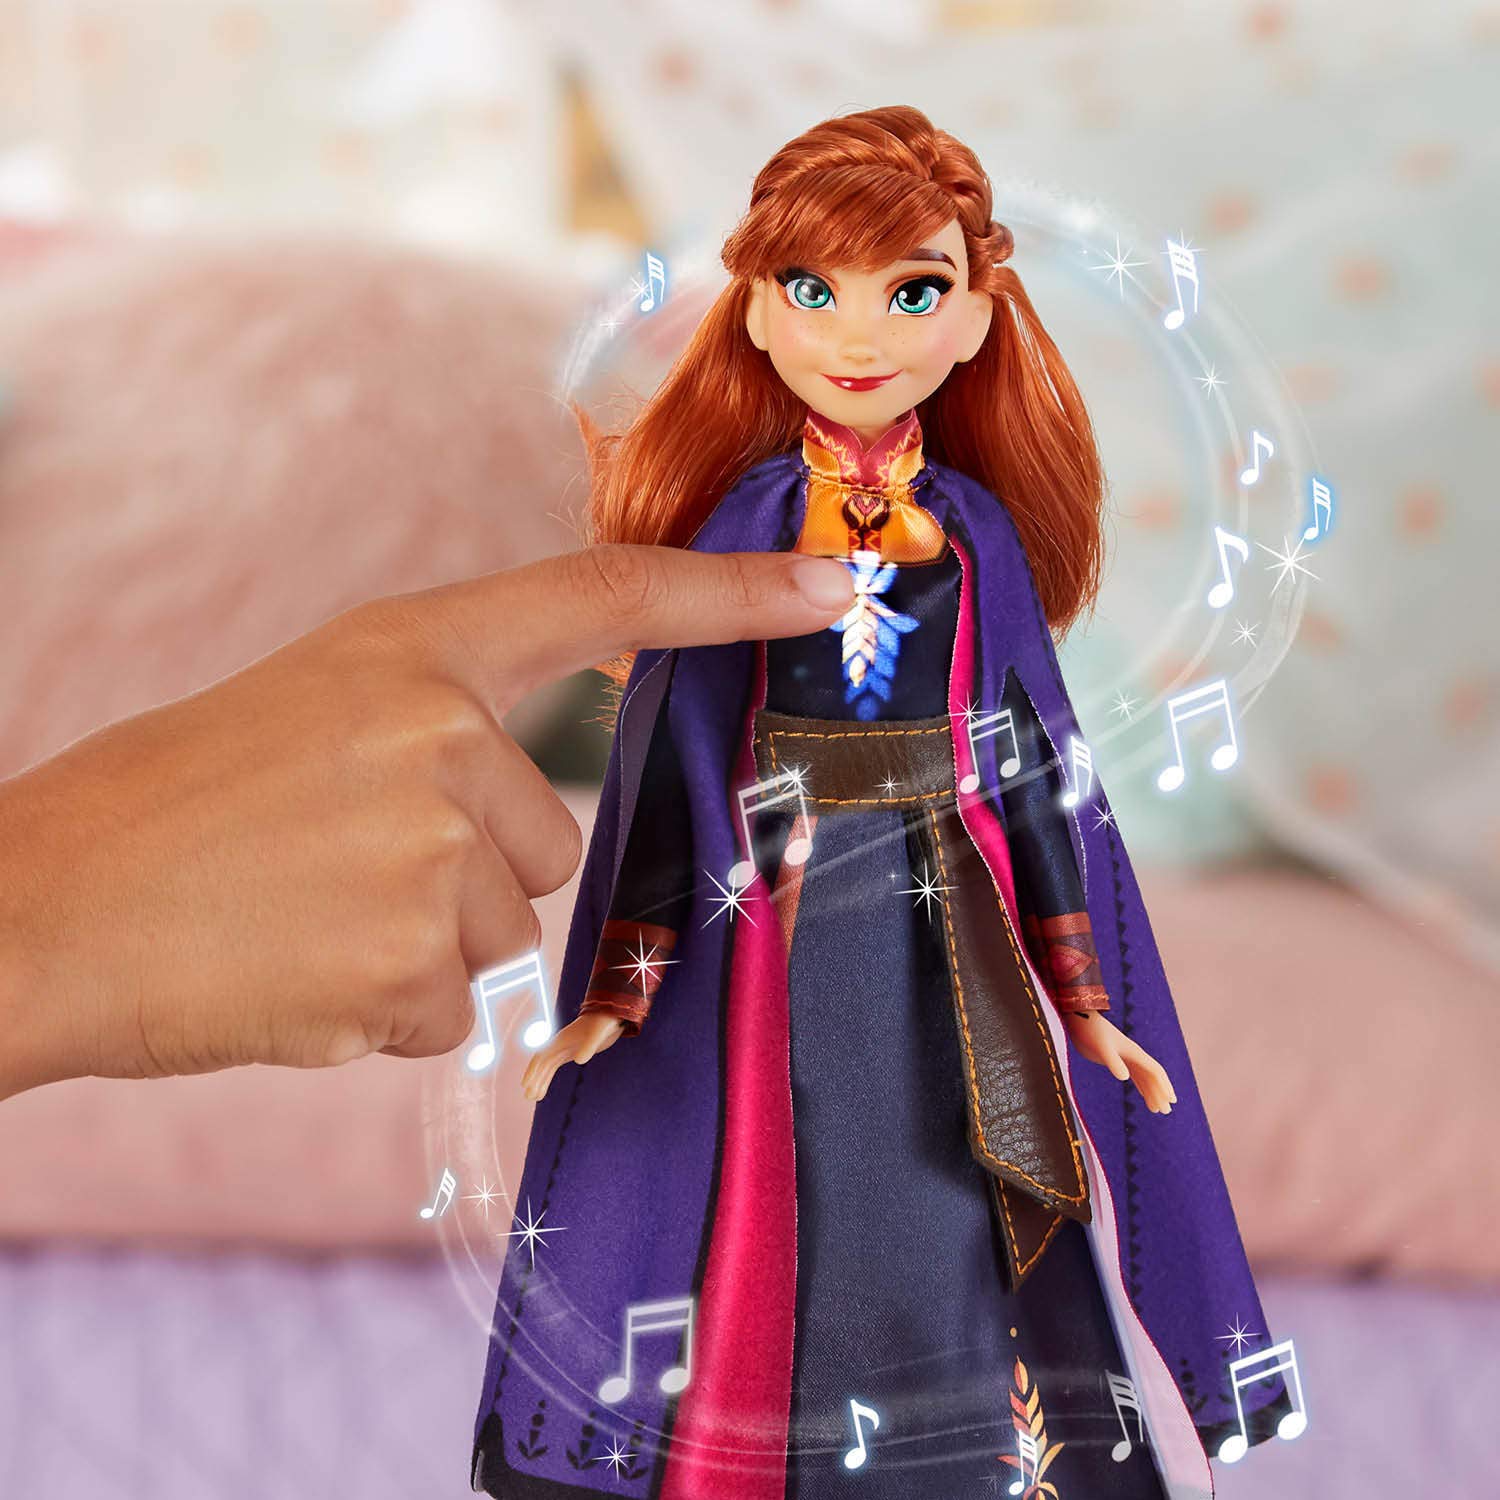 Disney Frozen Singing Anna Fashion Doll with Music Wearing A Purple Dress Inspired by 2, Toy for Kids 3 Years & Up, Includes doll, outfit, boots, and instructions.